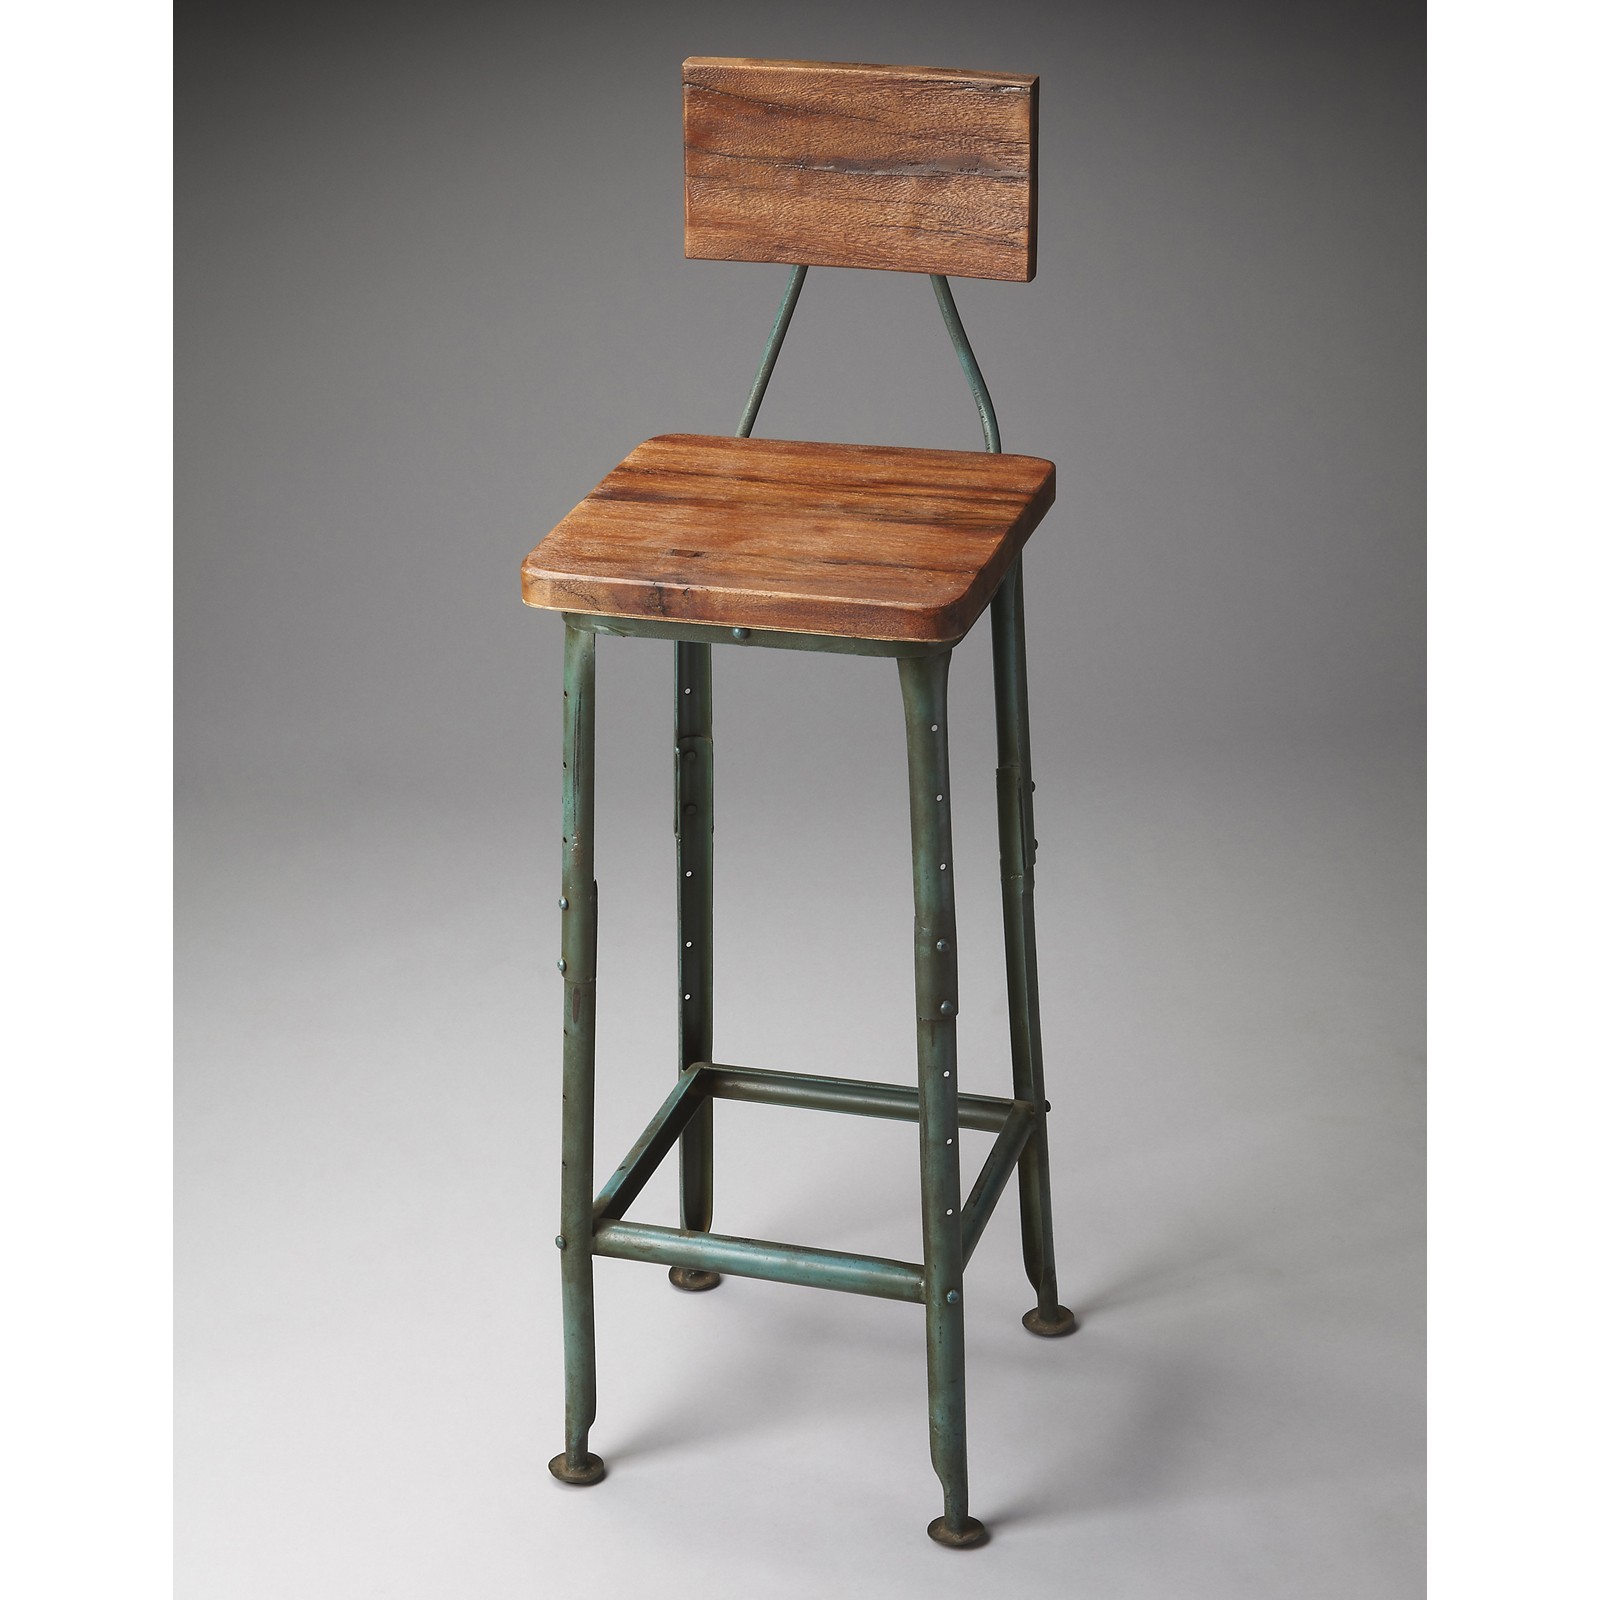 Metalworks bar stool with wooden seat and back rustic bar